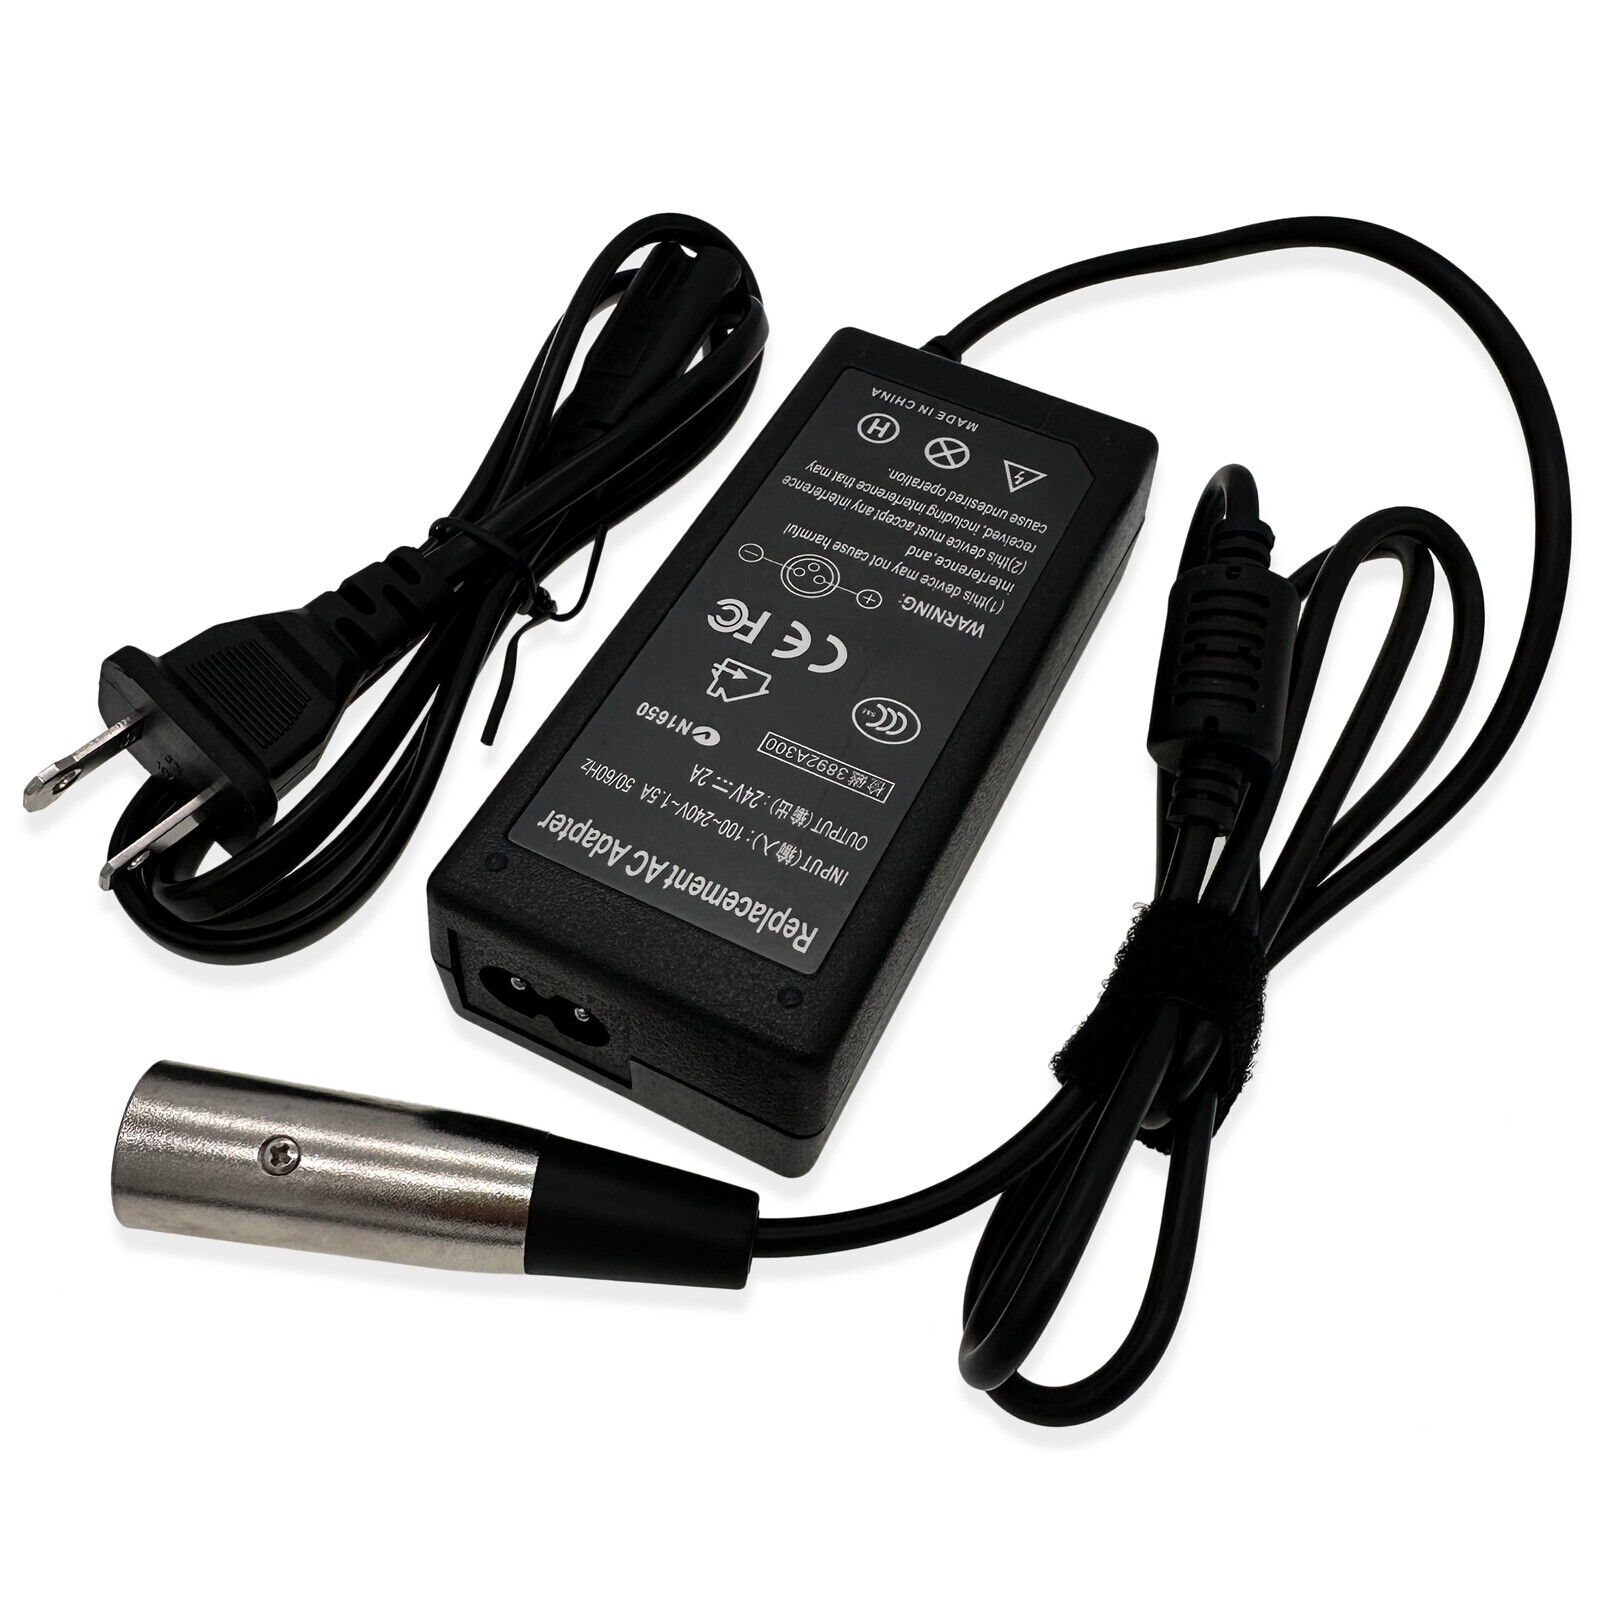 24V 2A Battery Charger for LASHOUT 400W 600W Shoprider mobility Scootie Scooter 24V 2A Battery Charger for LASHOUT 400W